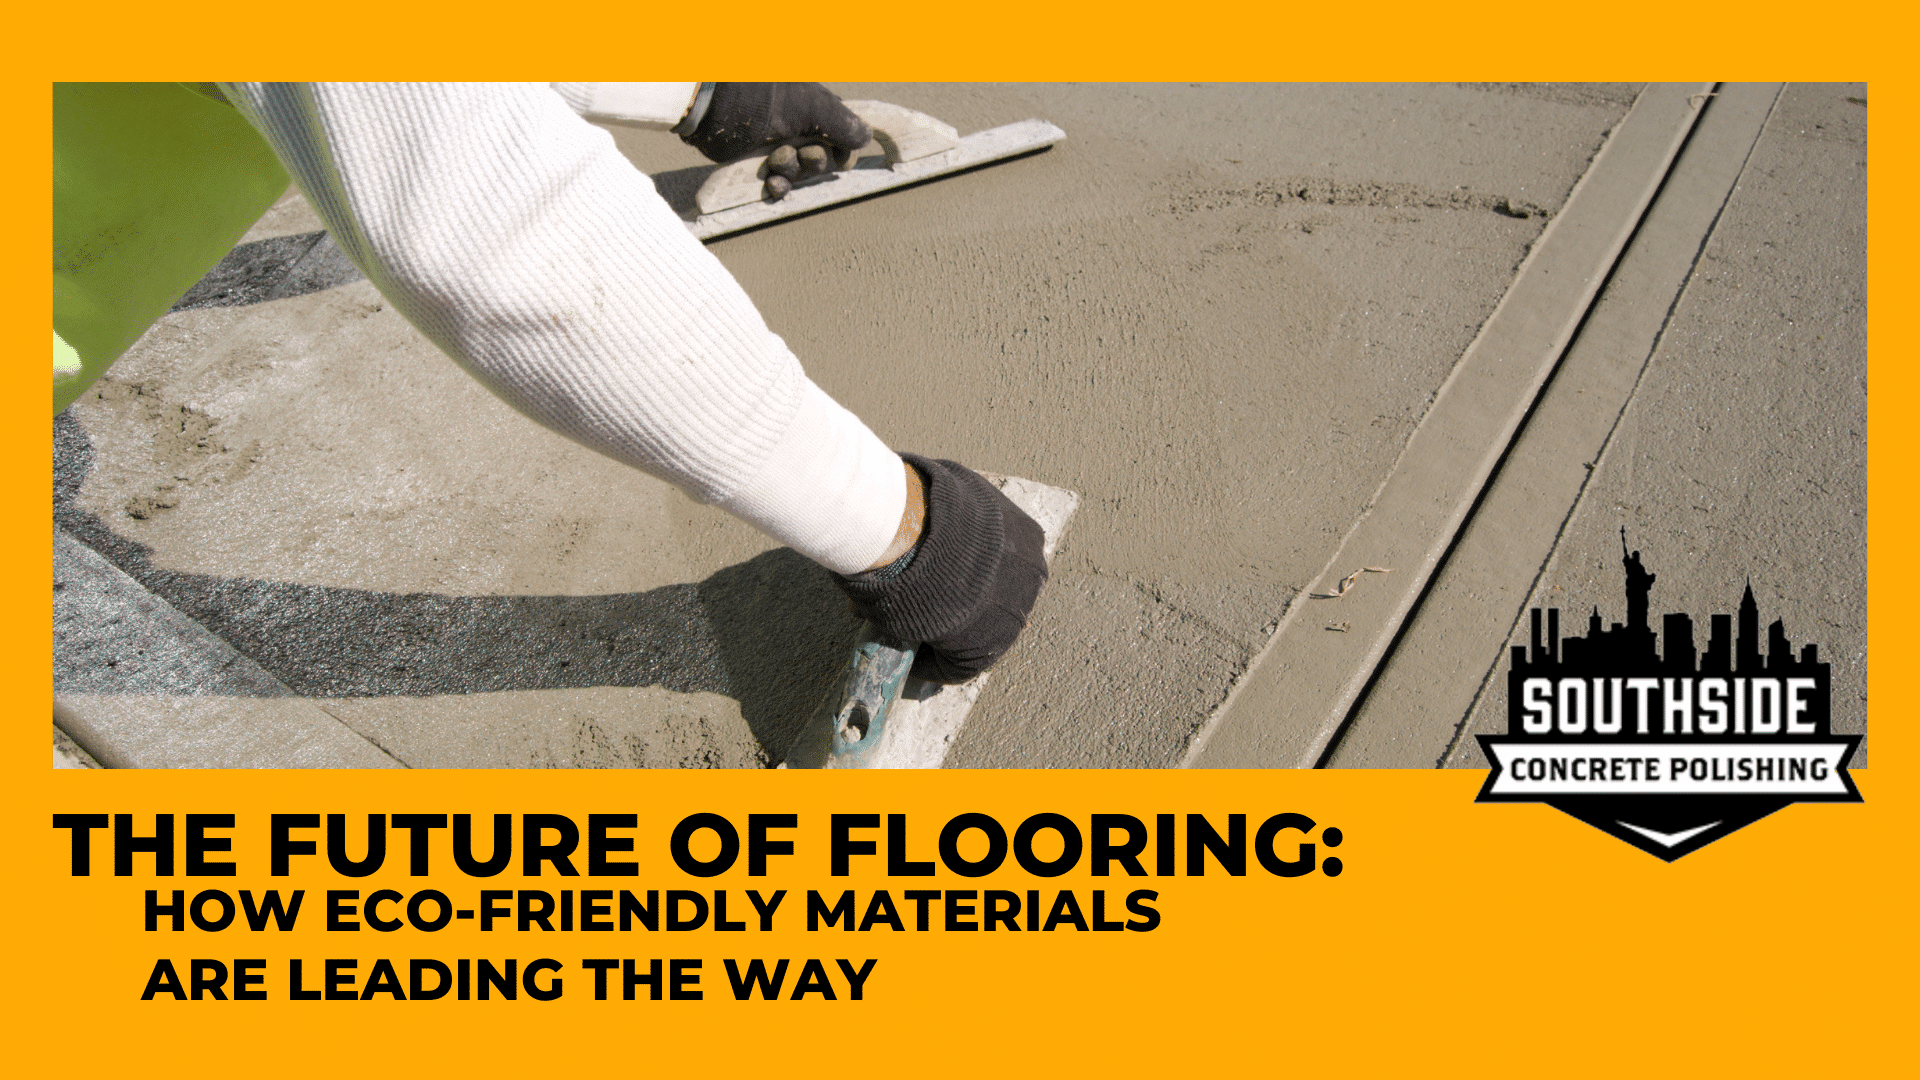 The Future of Flooring: How Eco-Friendly Materials are Leading the Way 11